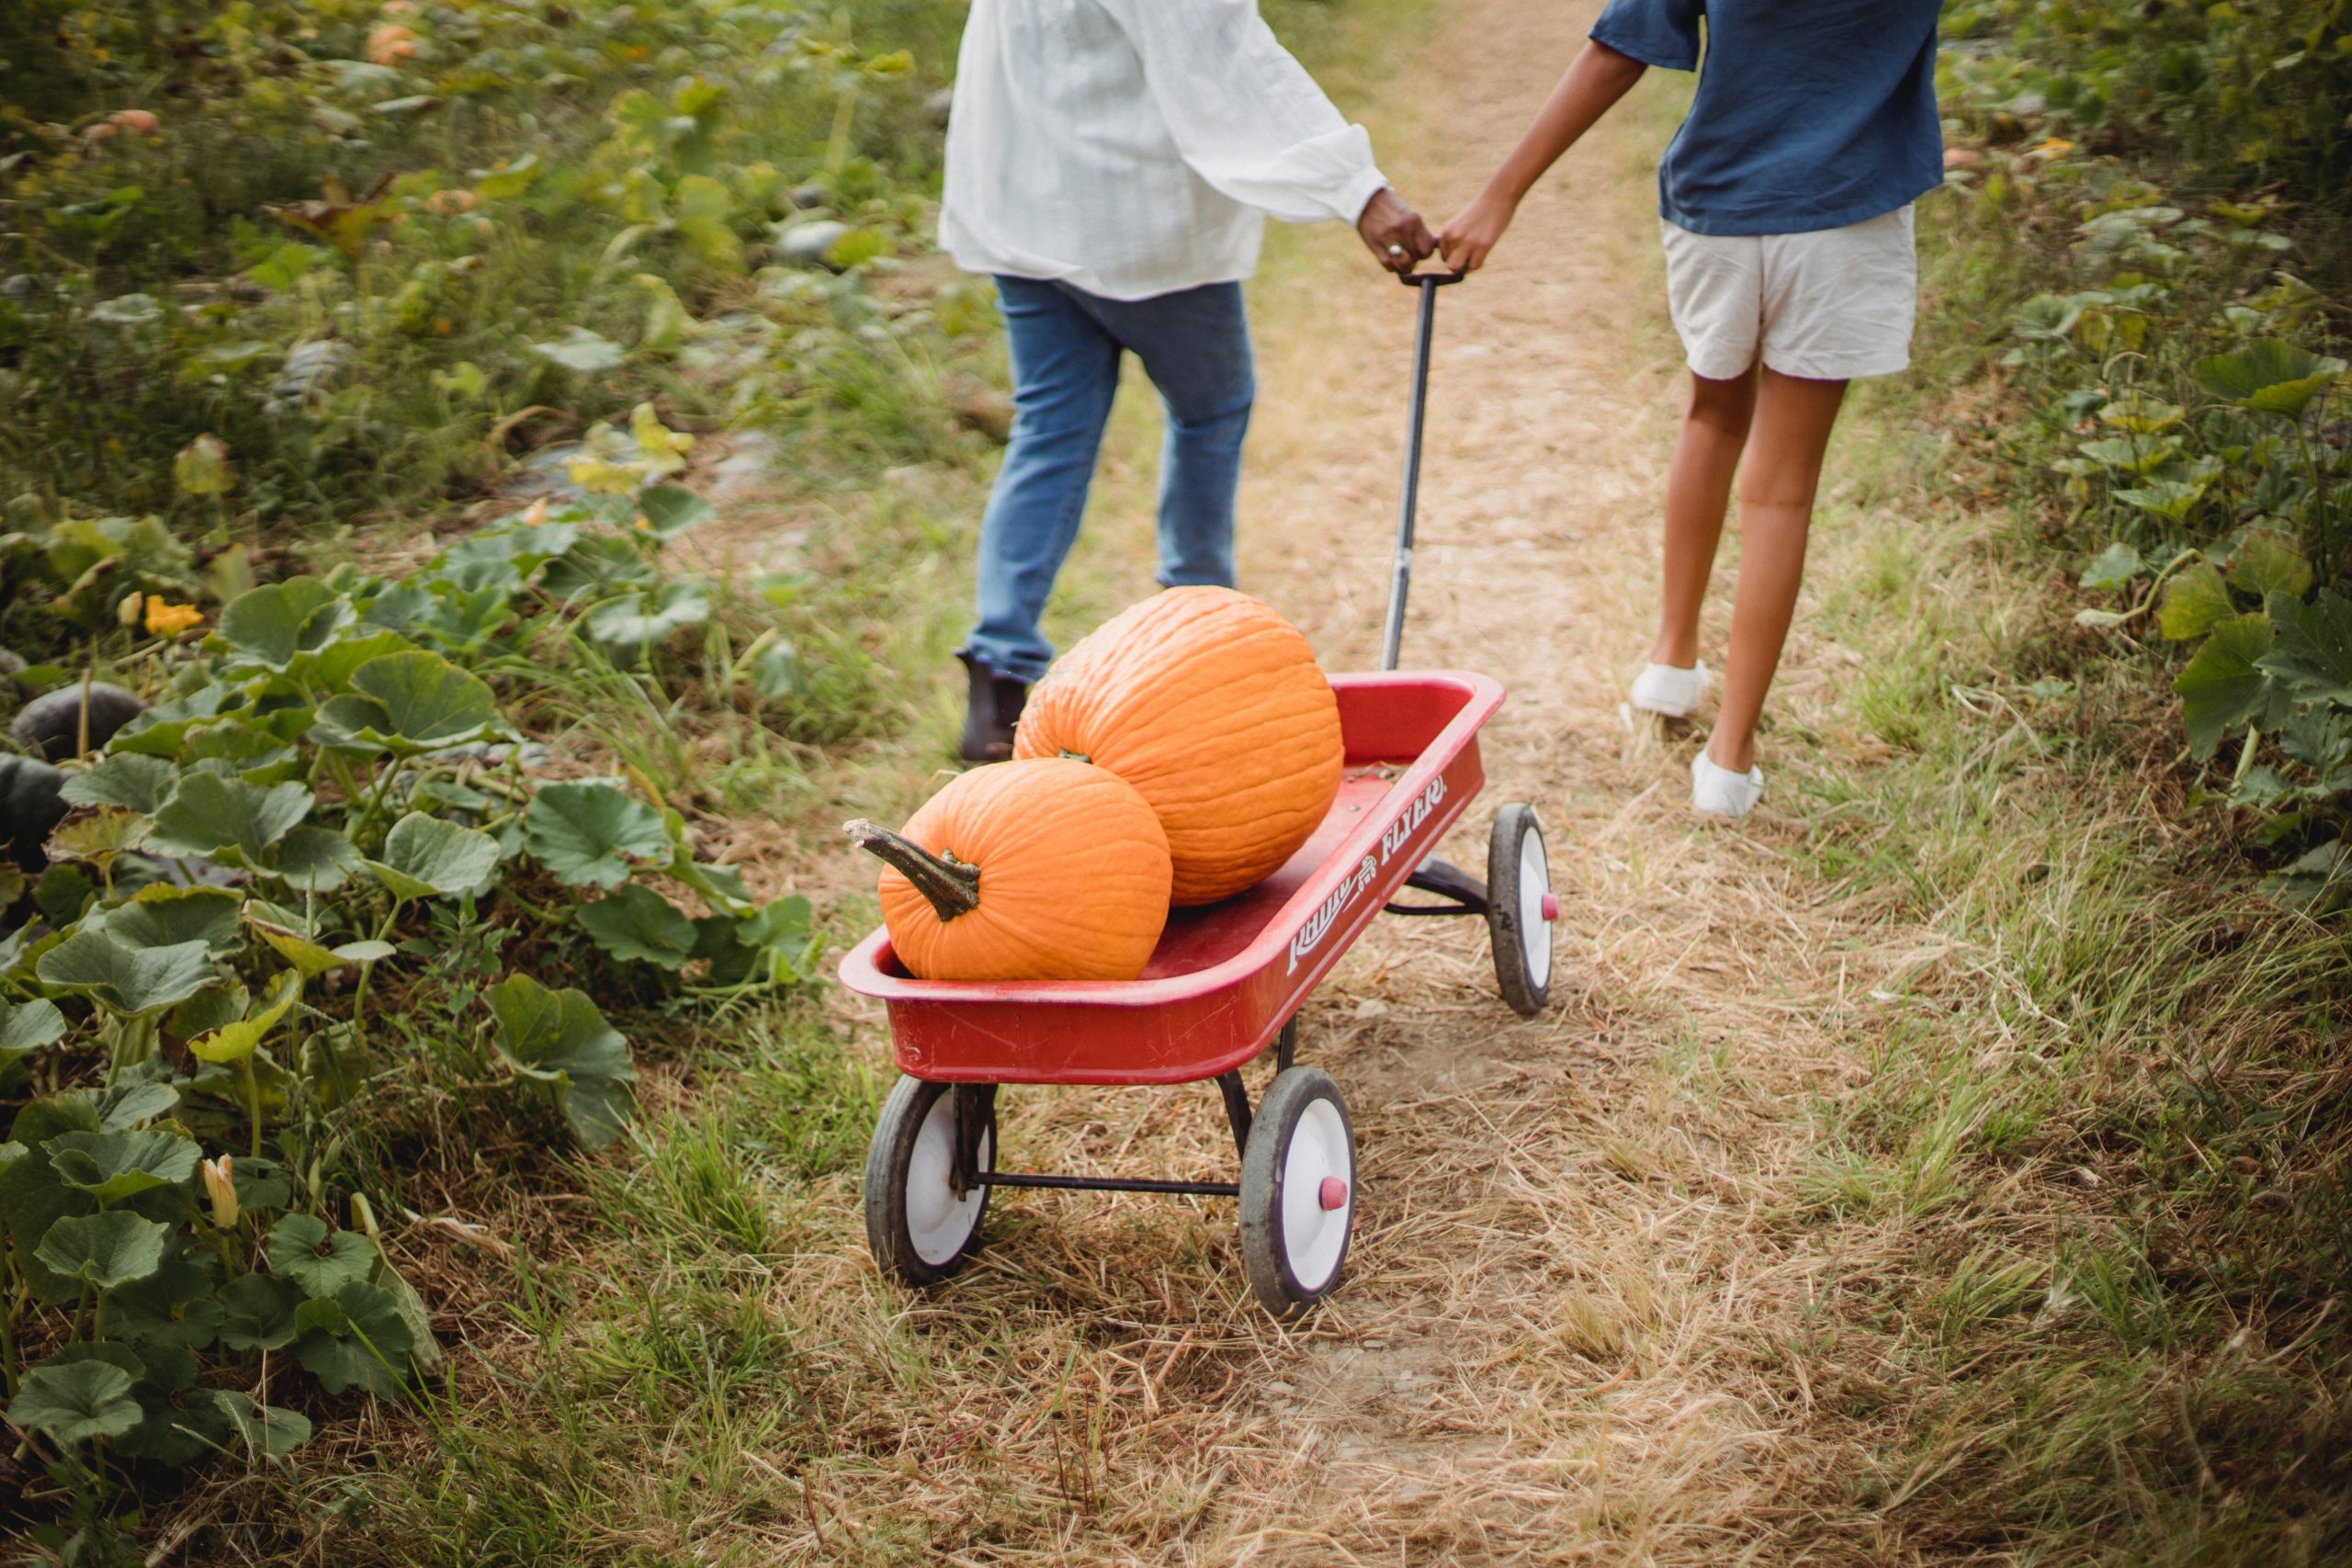 two people carry two orange pumpkins on a kid's wagon